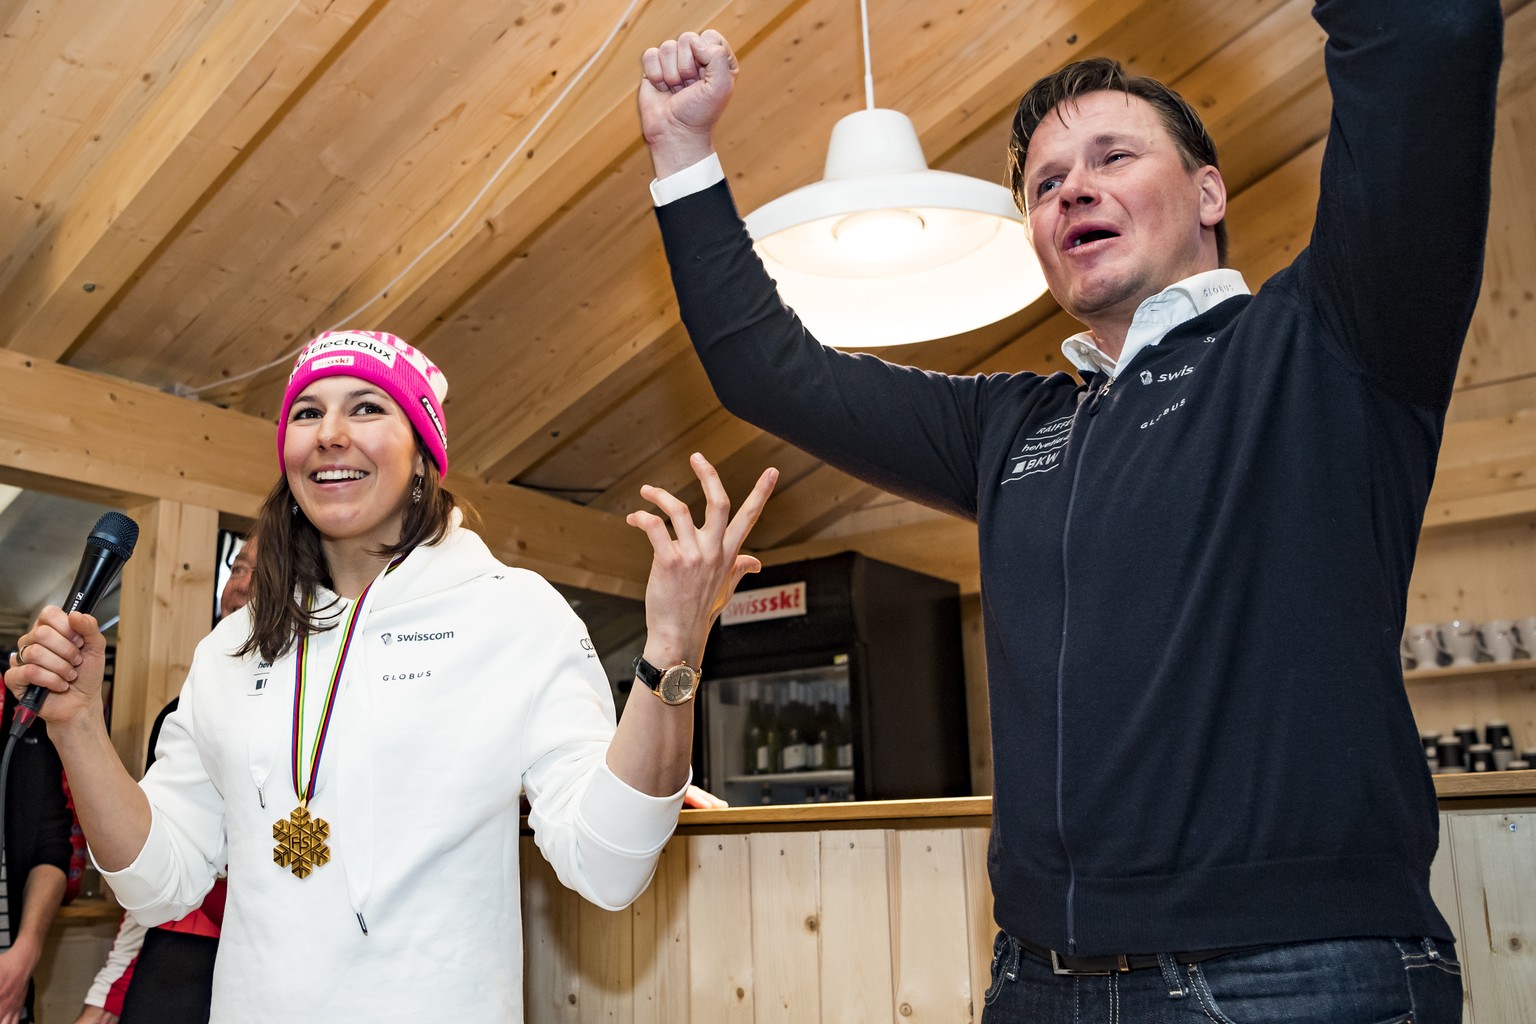 Wendy Holdener of Switzerland, gold medal, celebrates with Urs Lehmann, president of the Swiss-Ski Federation at the House of Switzerland during the medals ceremony after the Alpine Combined at the 20 ...